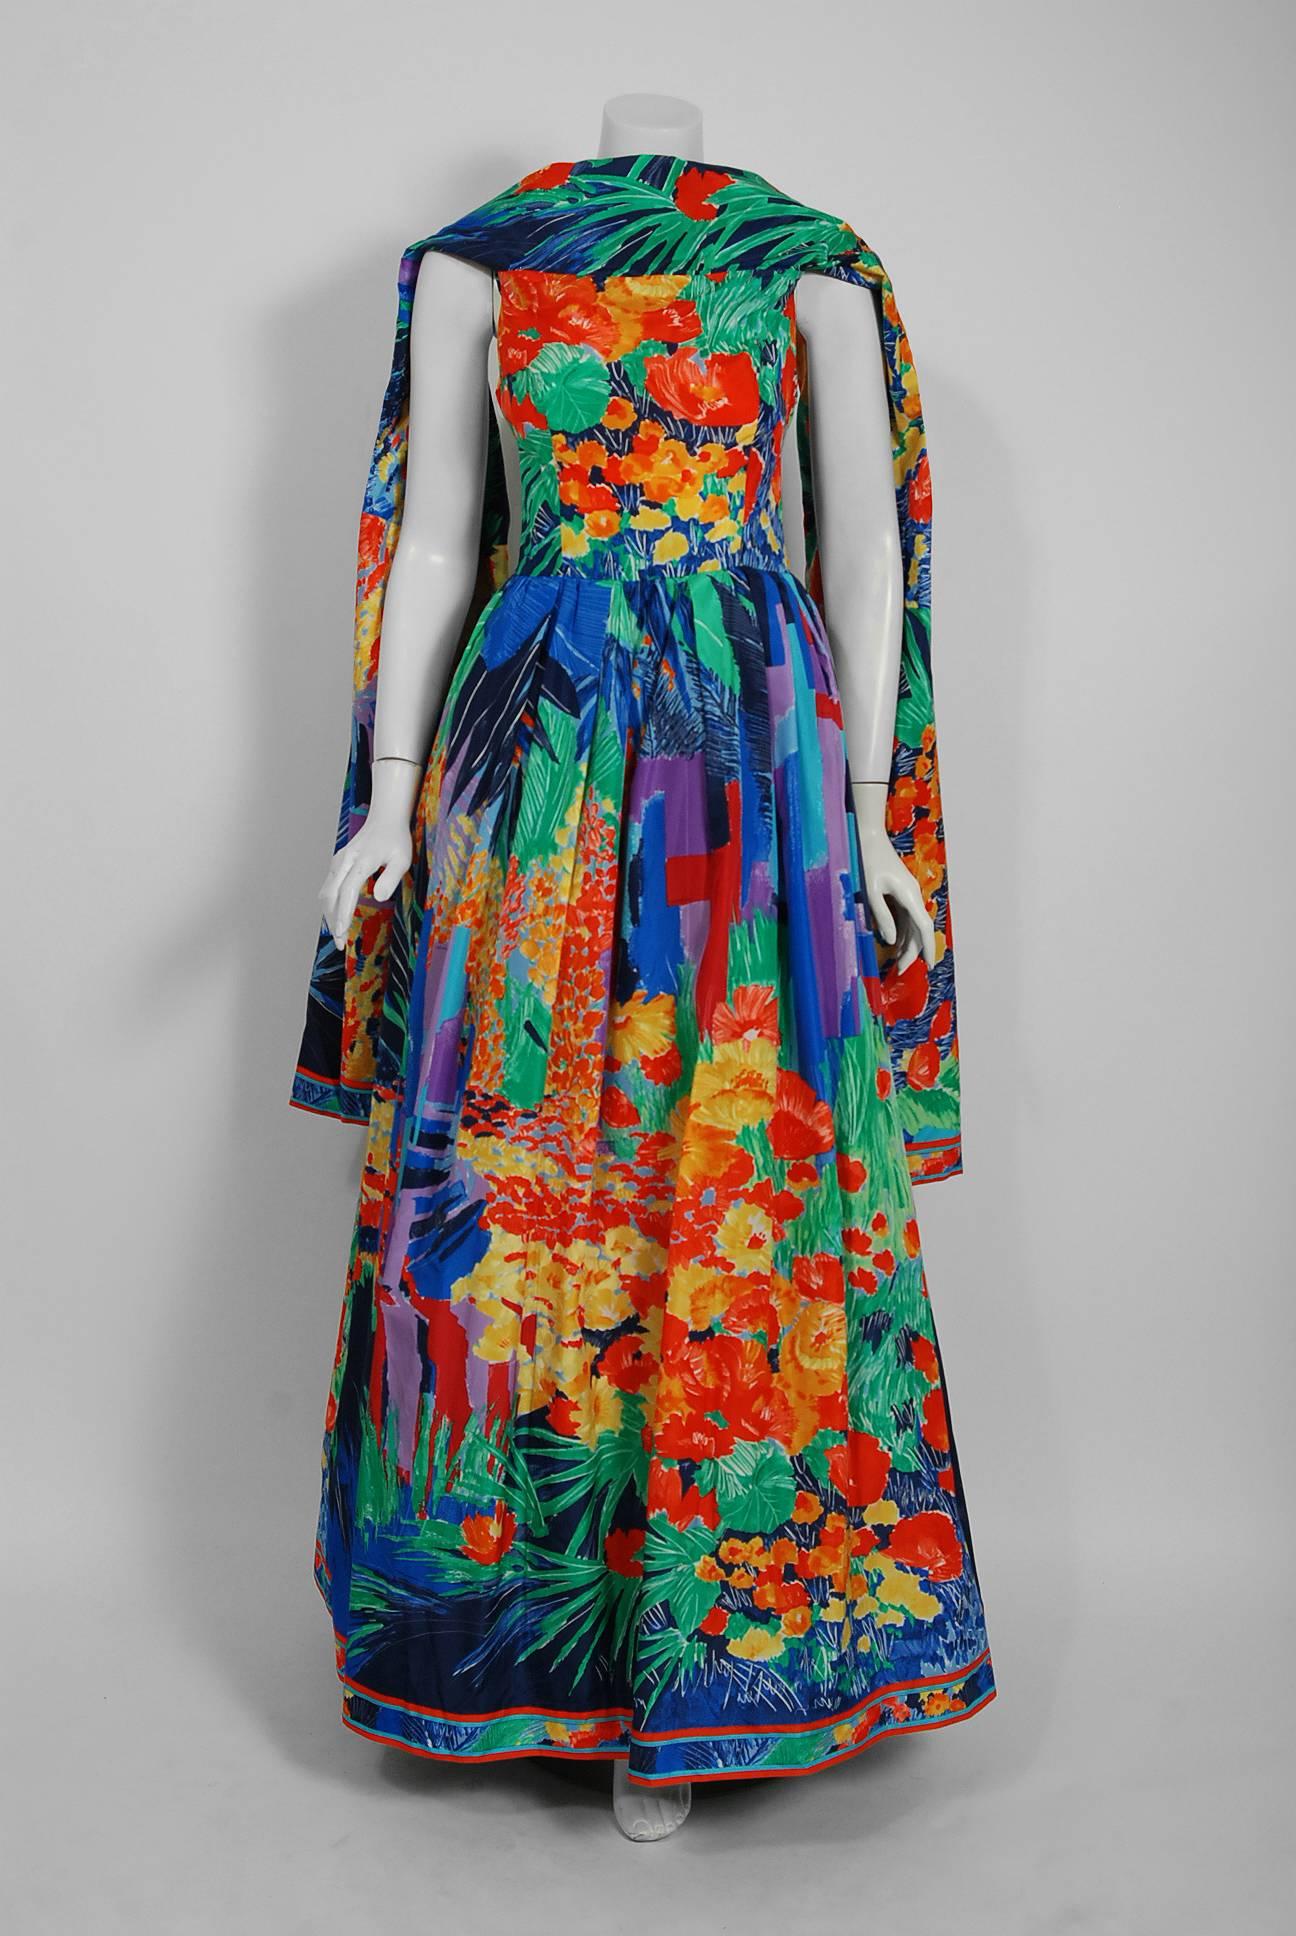 Breathtaking Leonard Paris designer watercolor floral print ballgown dating back to their 1992 collection. In 1958 Jacques Leonard asked Daniel Tribouillard to start a new company: Leonard Fashion. A man of artistic temperament, Daniel Tribouillard